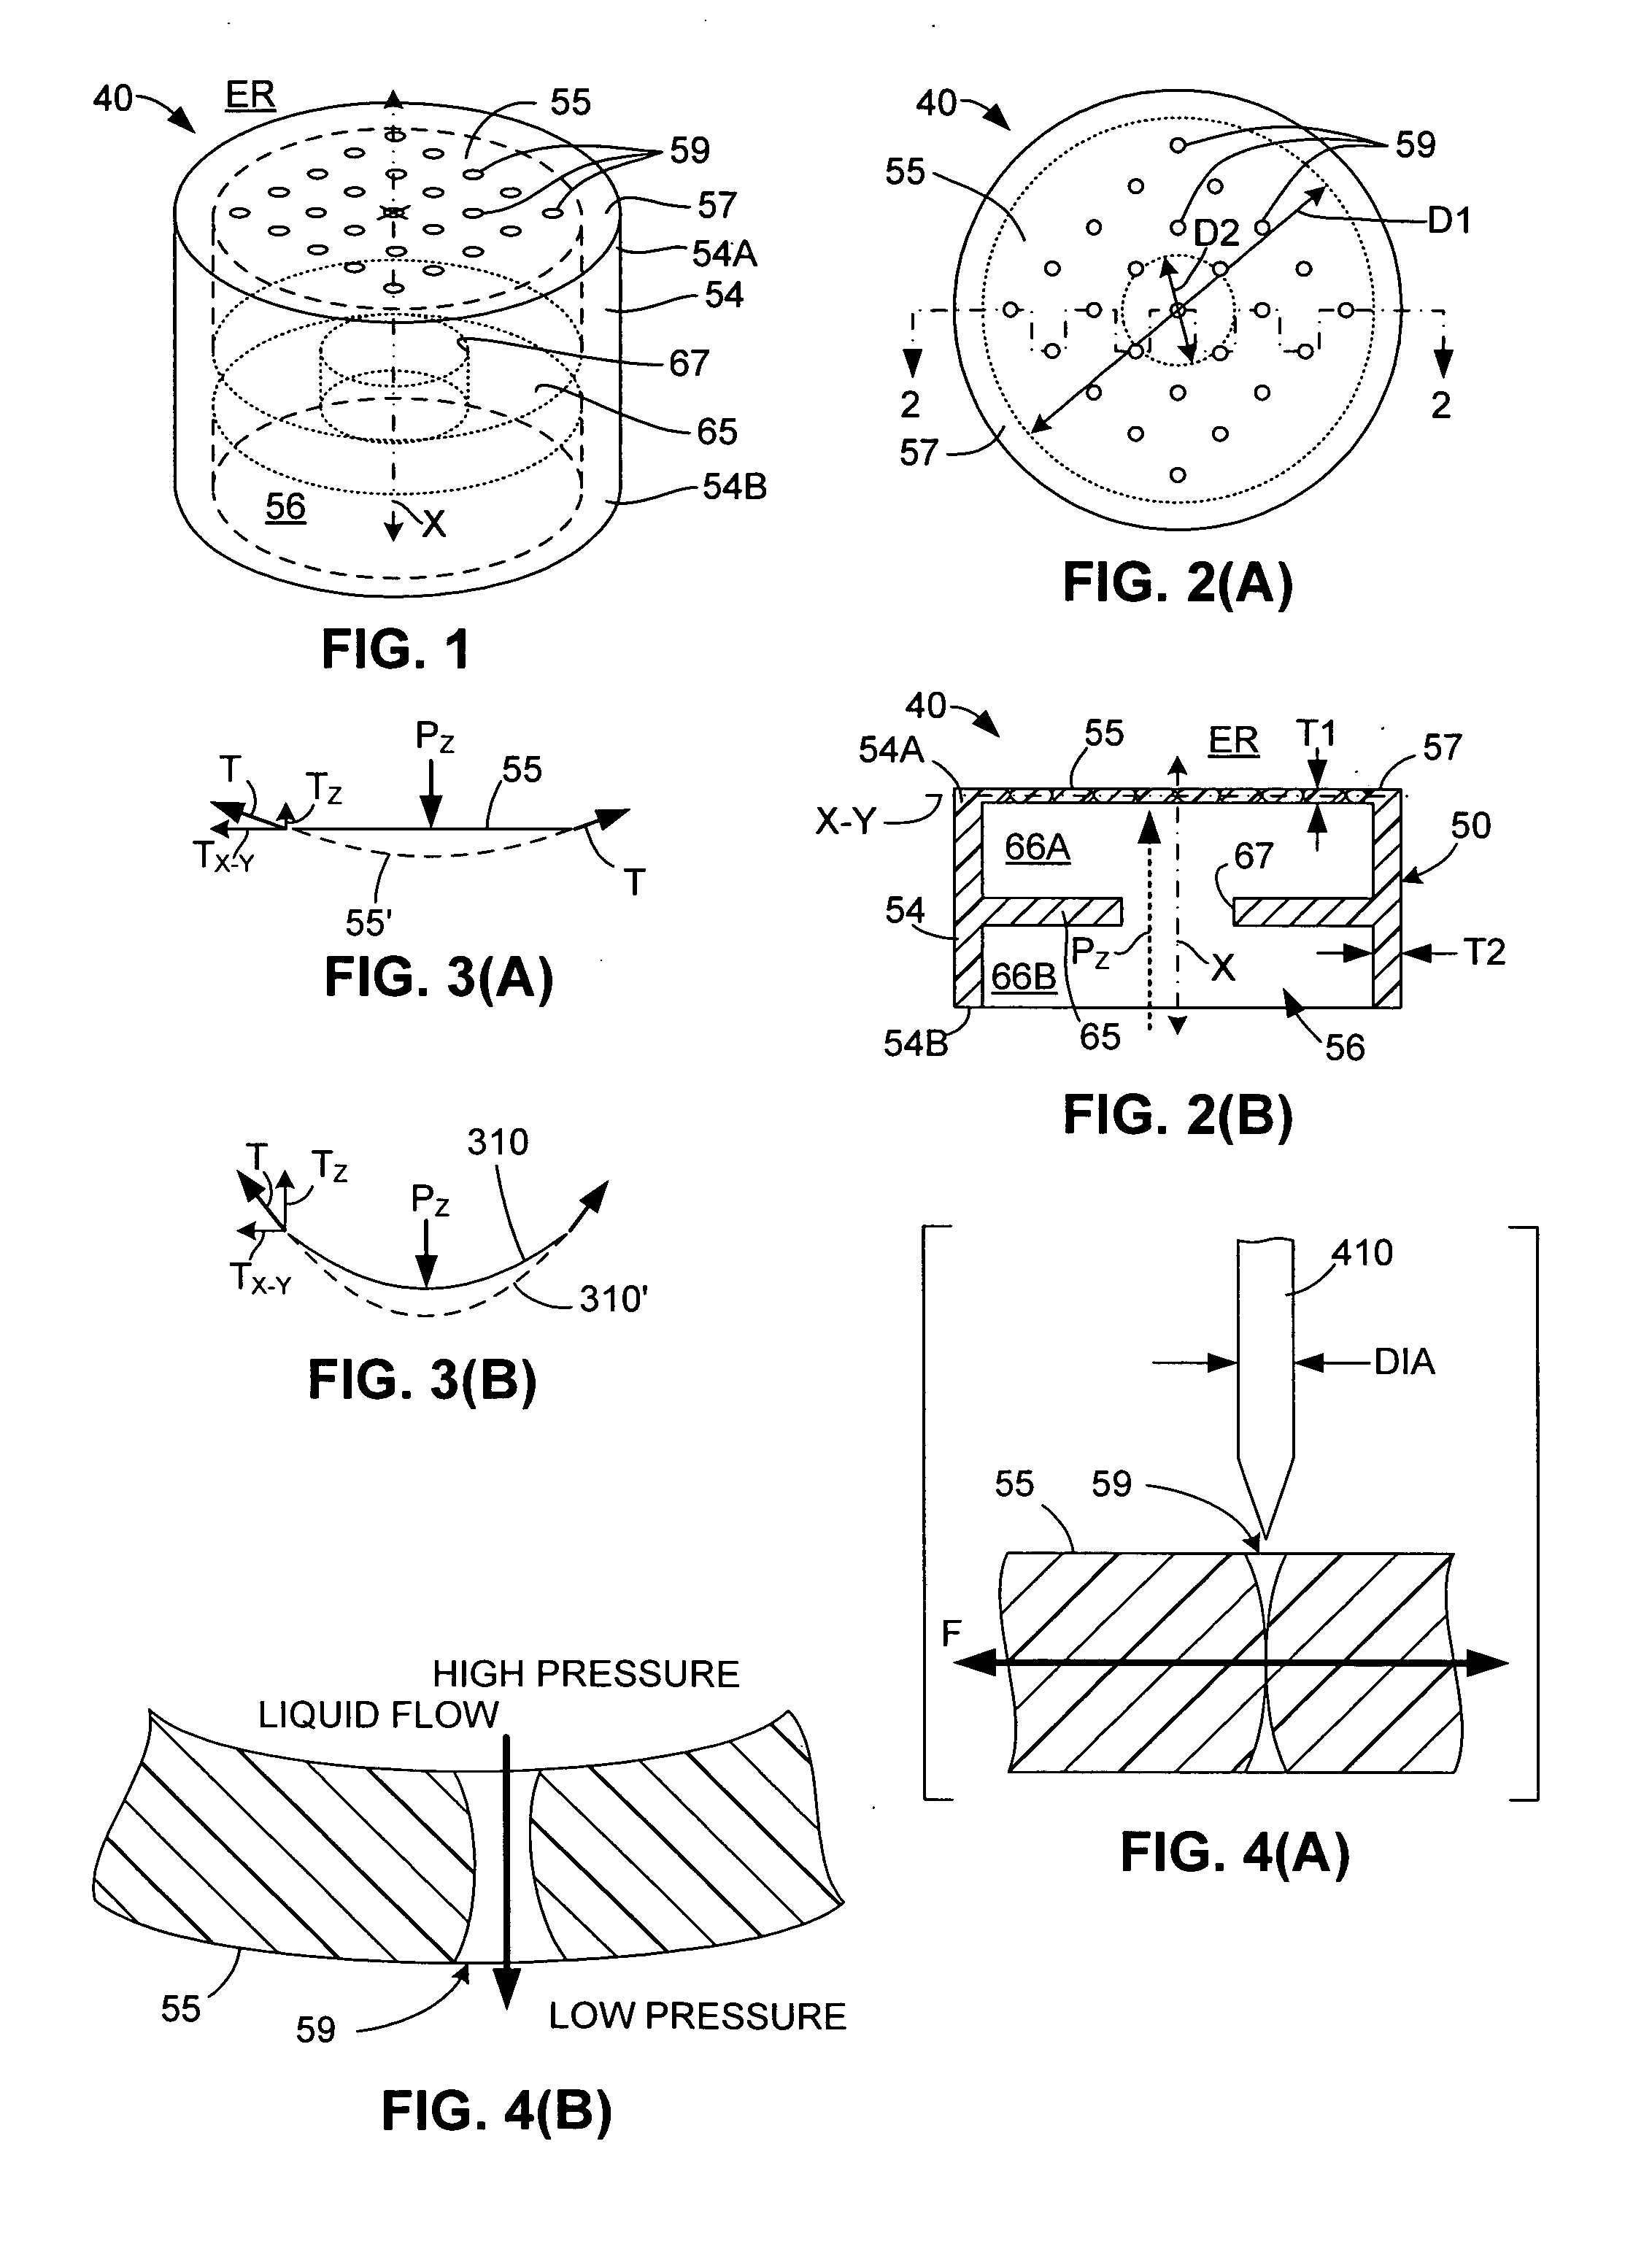 Non-spill container with flow control structure including baffle and elastic membrane having normally-closed pinholes